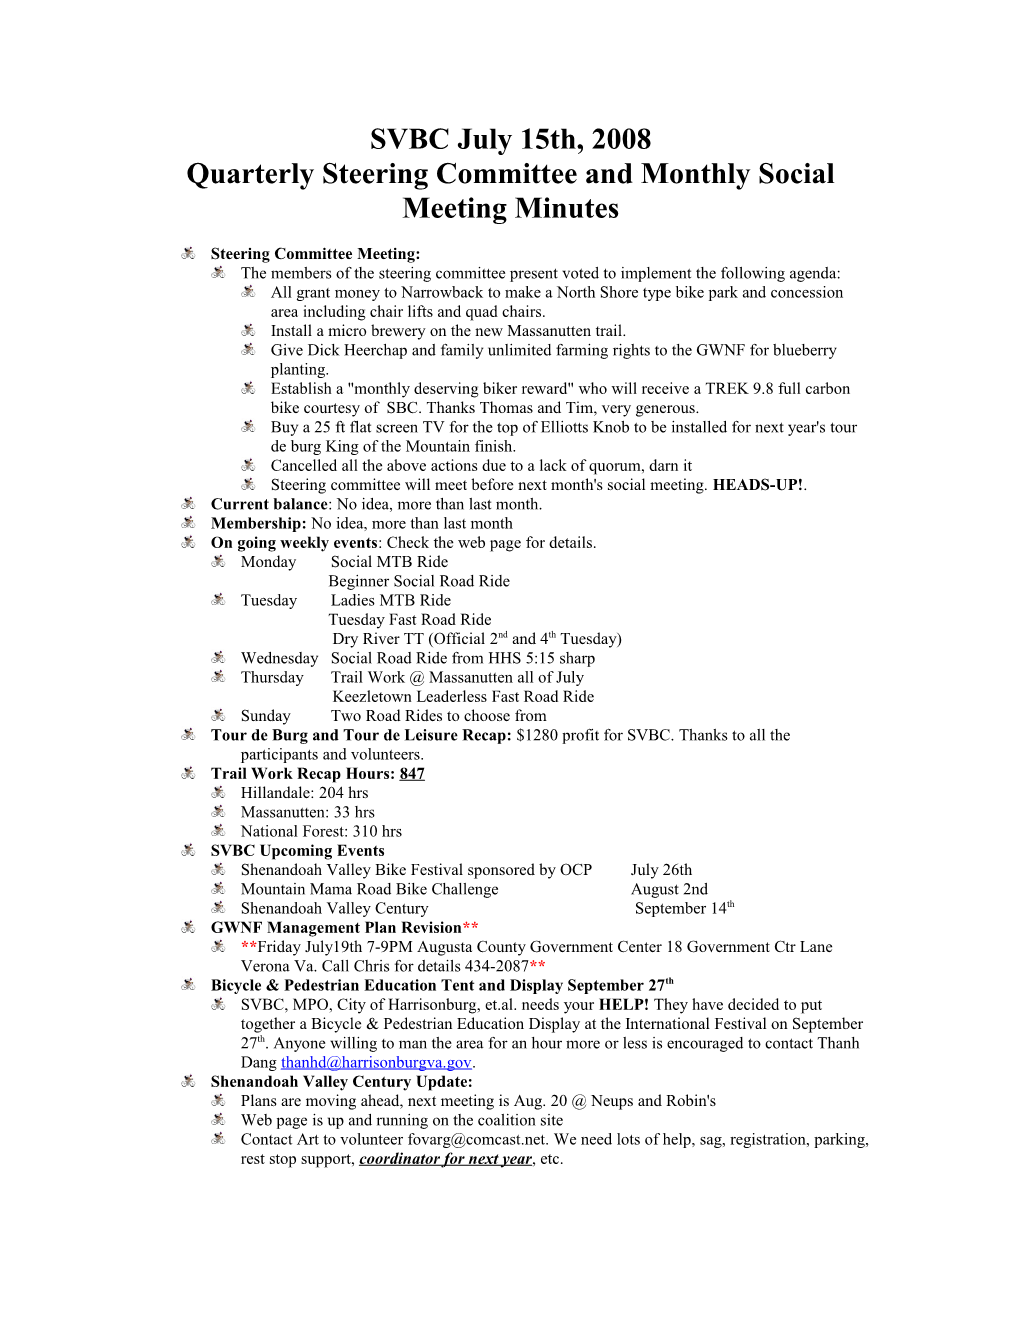 Quarterly Steering Committee and Monthly Social Meeting Minutes